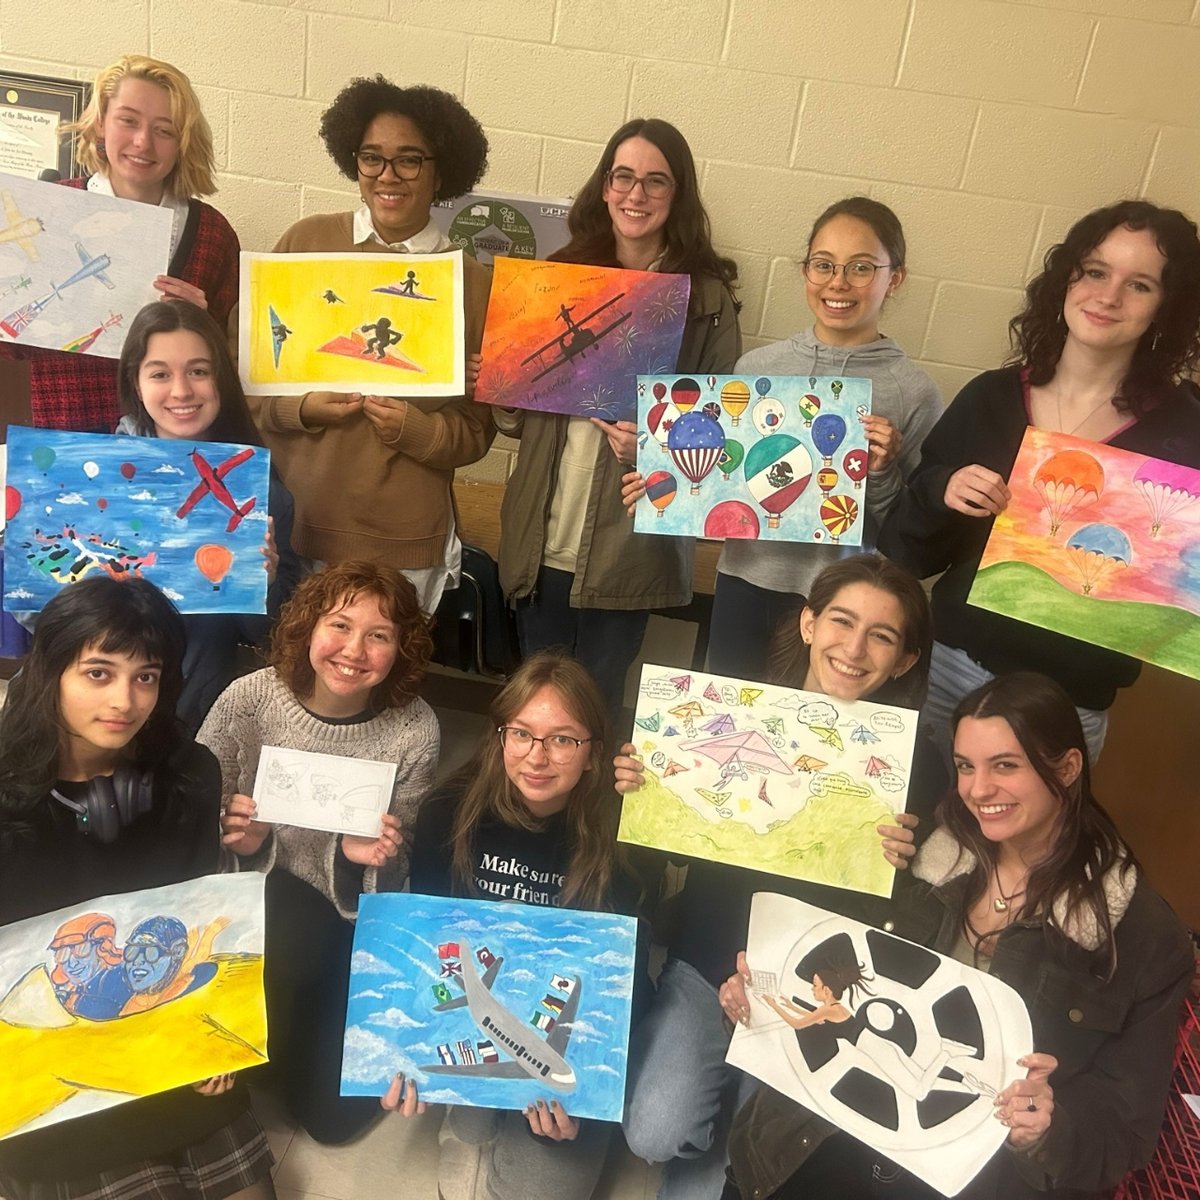 Huge CONGRATULATIONS to our ELEVEN Weddington High School students who were named Union County Aviation Art Contest Winners! We appreciate Ms. Soto for providing growth activities for our art students in the community! #portraitofagraduate  @UCPSNC  @AGHoulihan